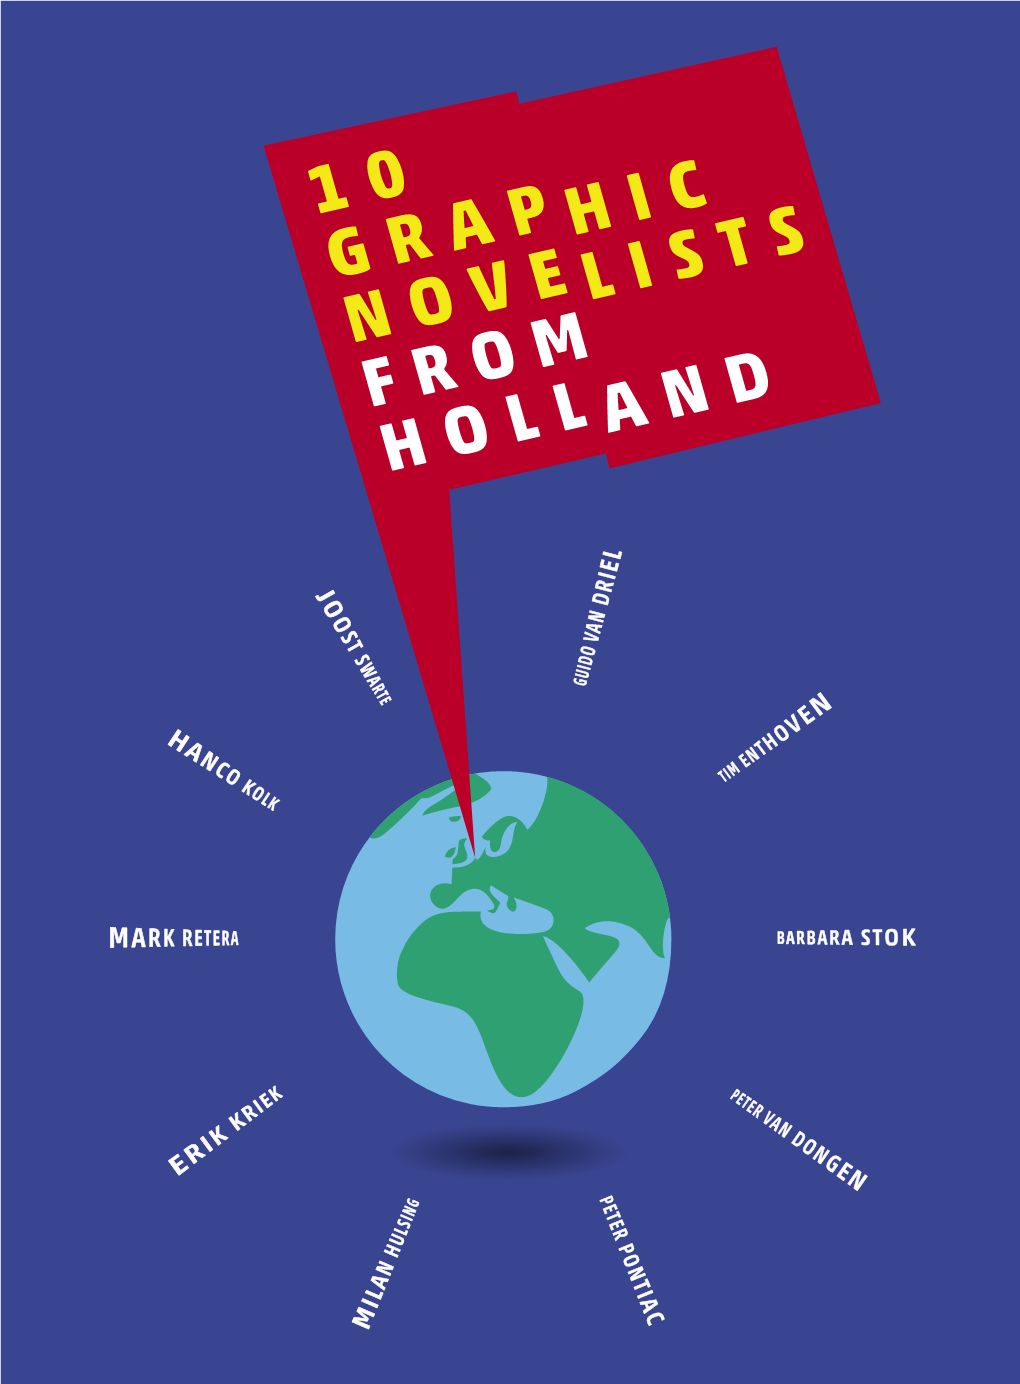 10 Graphic Novelists from Holland Is Published by the Dutch Foundation for Literature